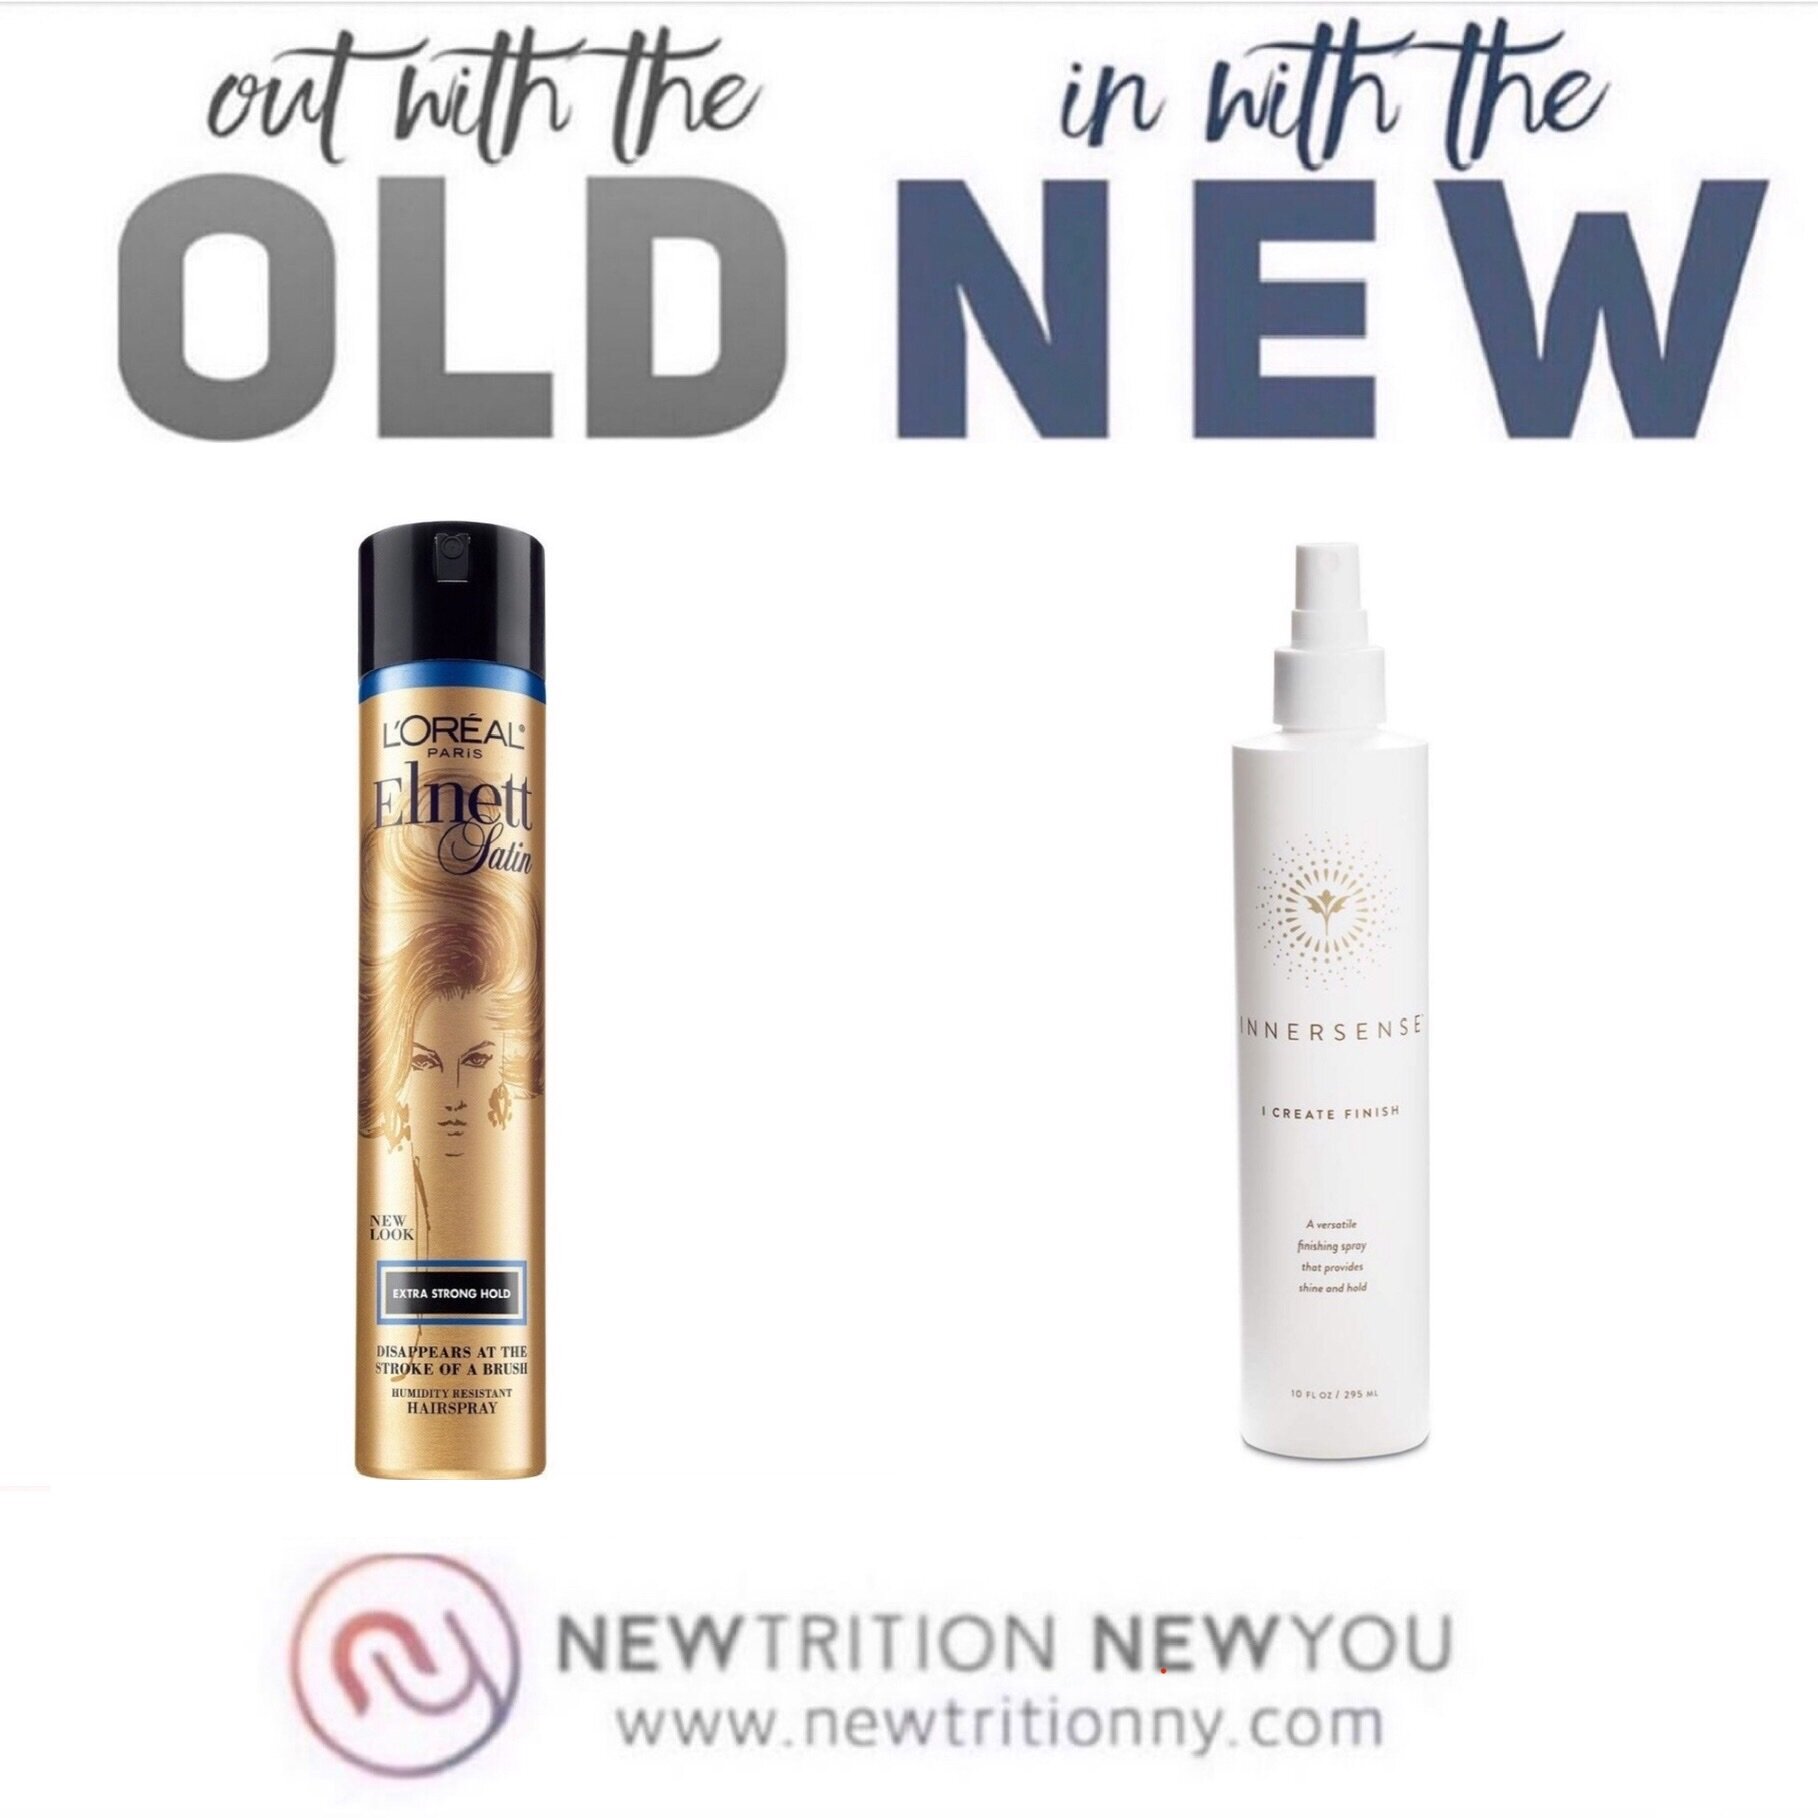 IN WITH THE NEW: Hairspray — Newtrition New You